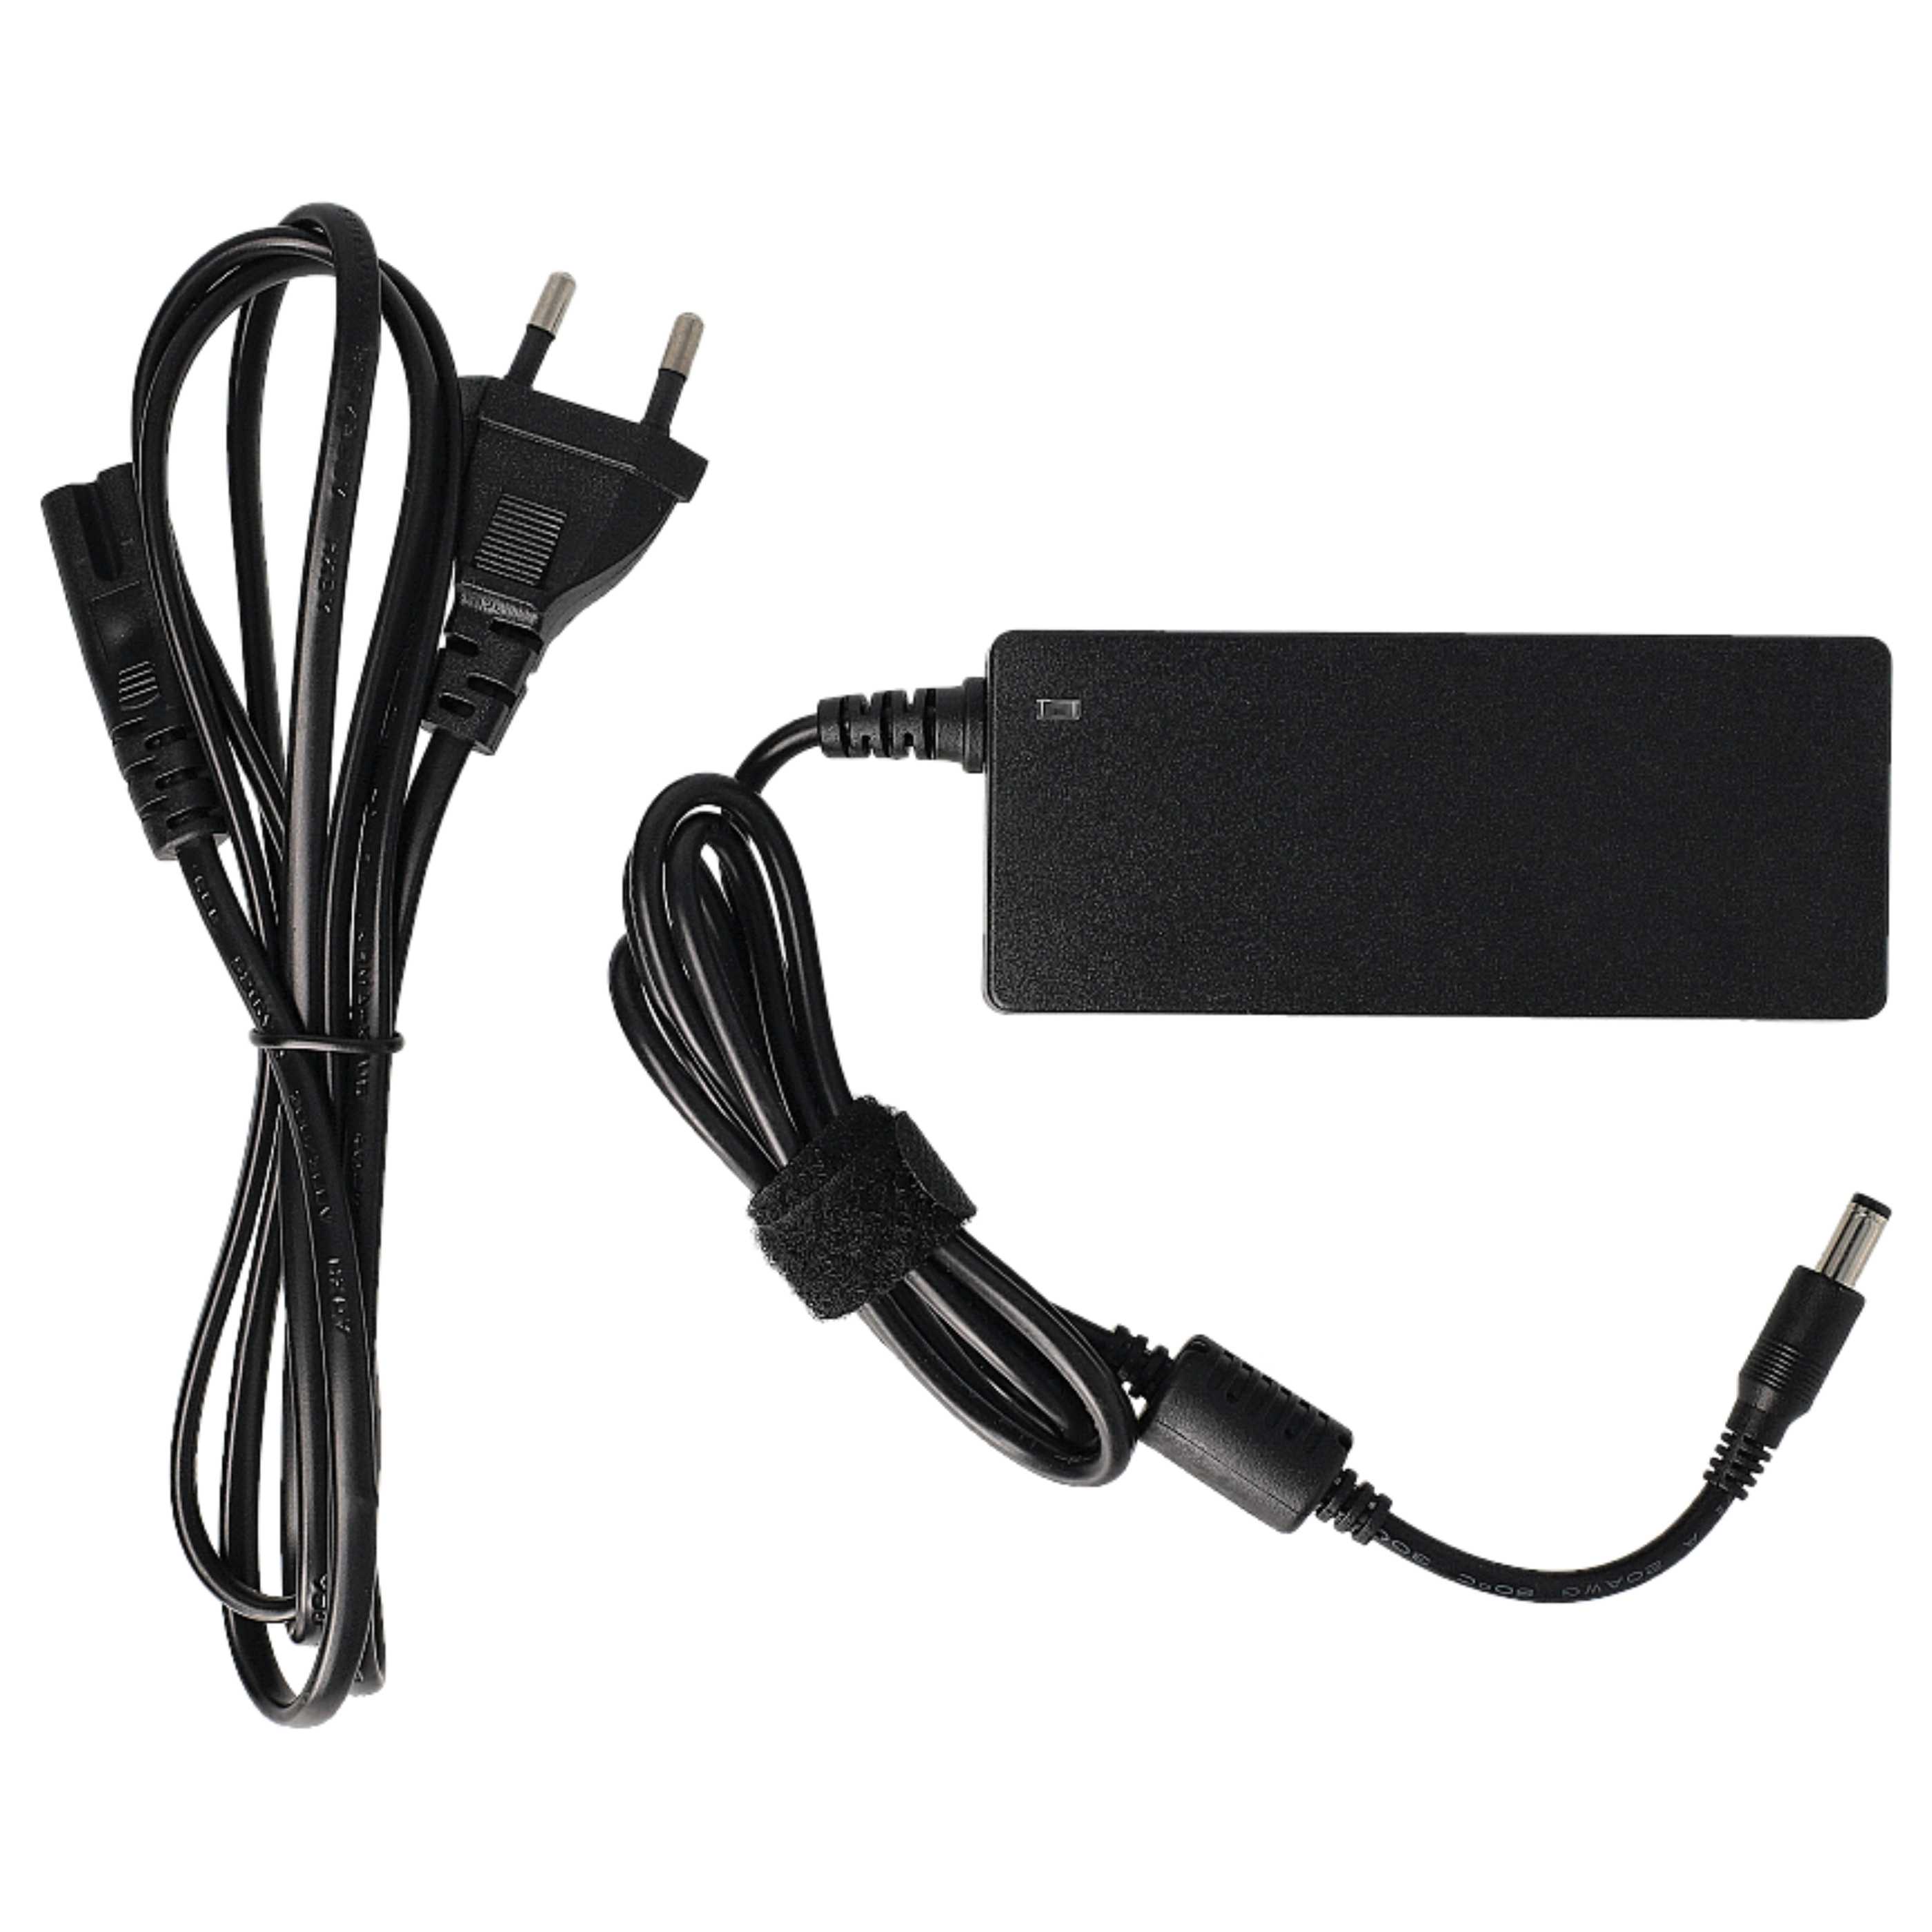 Mains Power Adapter replaces Samsung AD-6019(V), AD-6019, PSCV600104A, AD-6019A for SamsungNotebook, 60 W